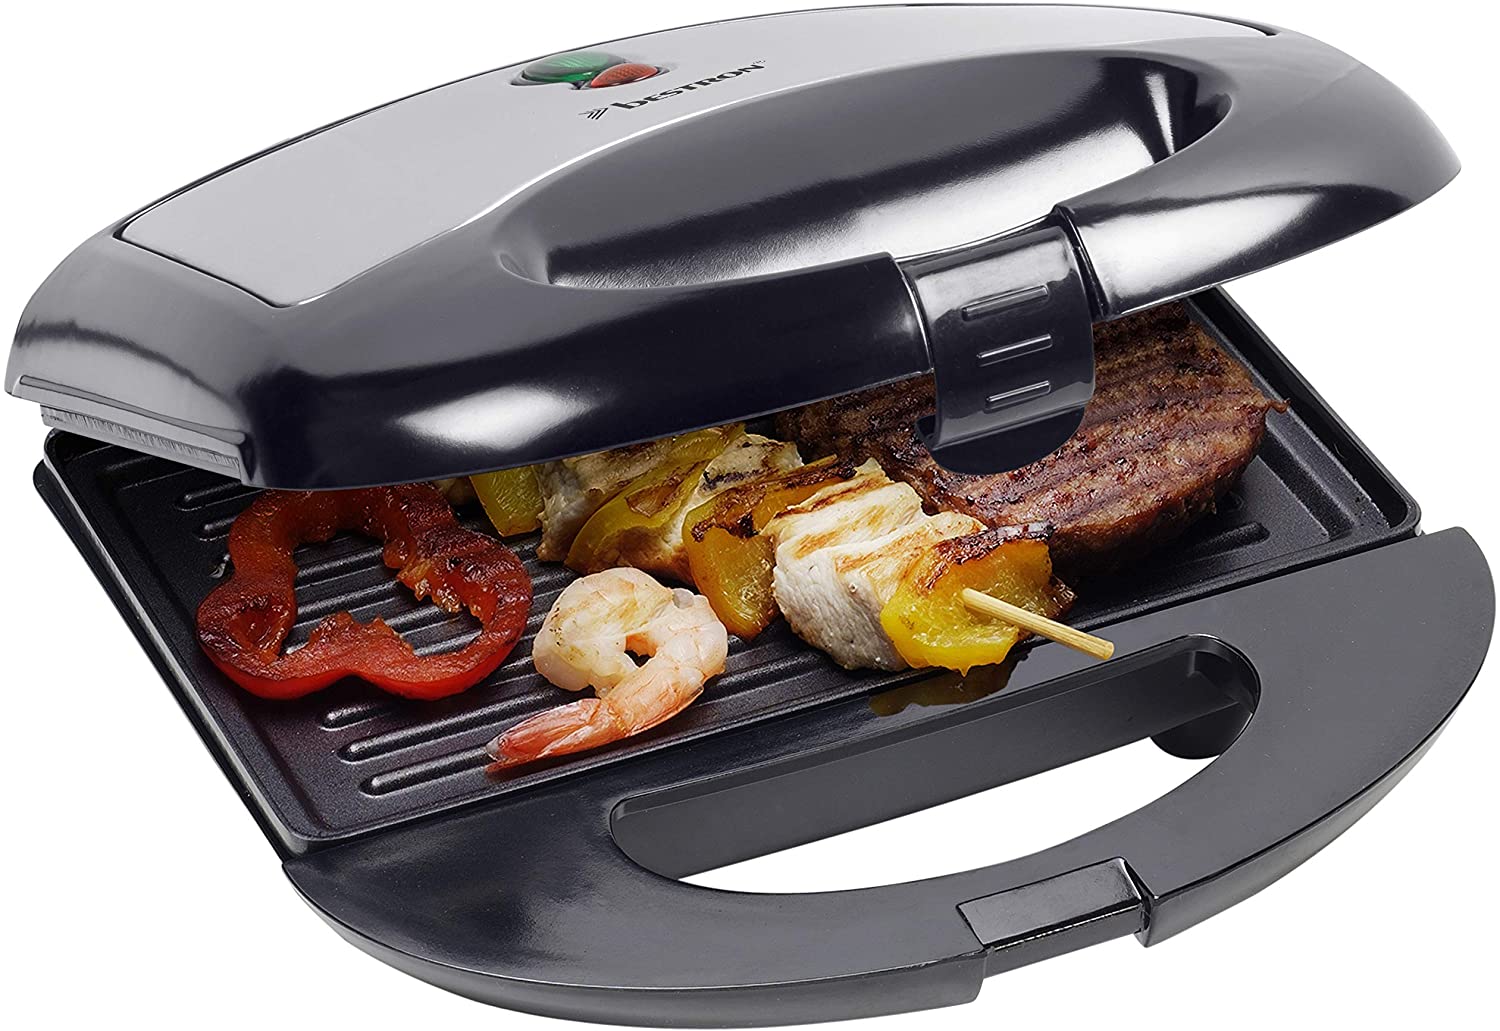 Bestron Compact Non-Stick Contact Grill 700W Black